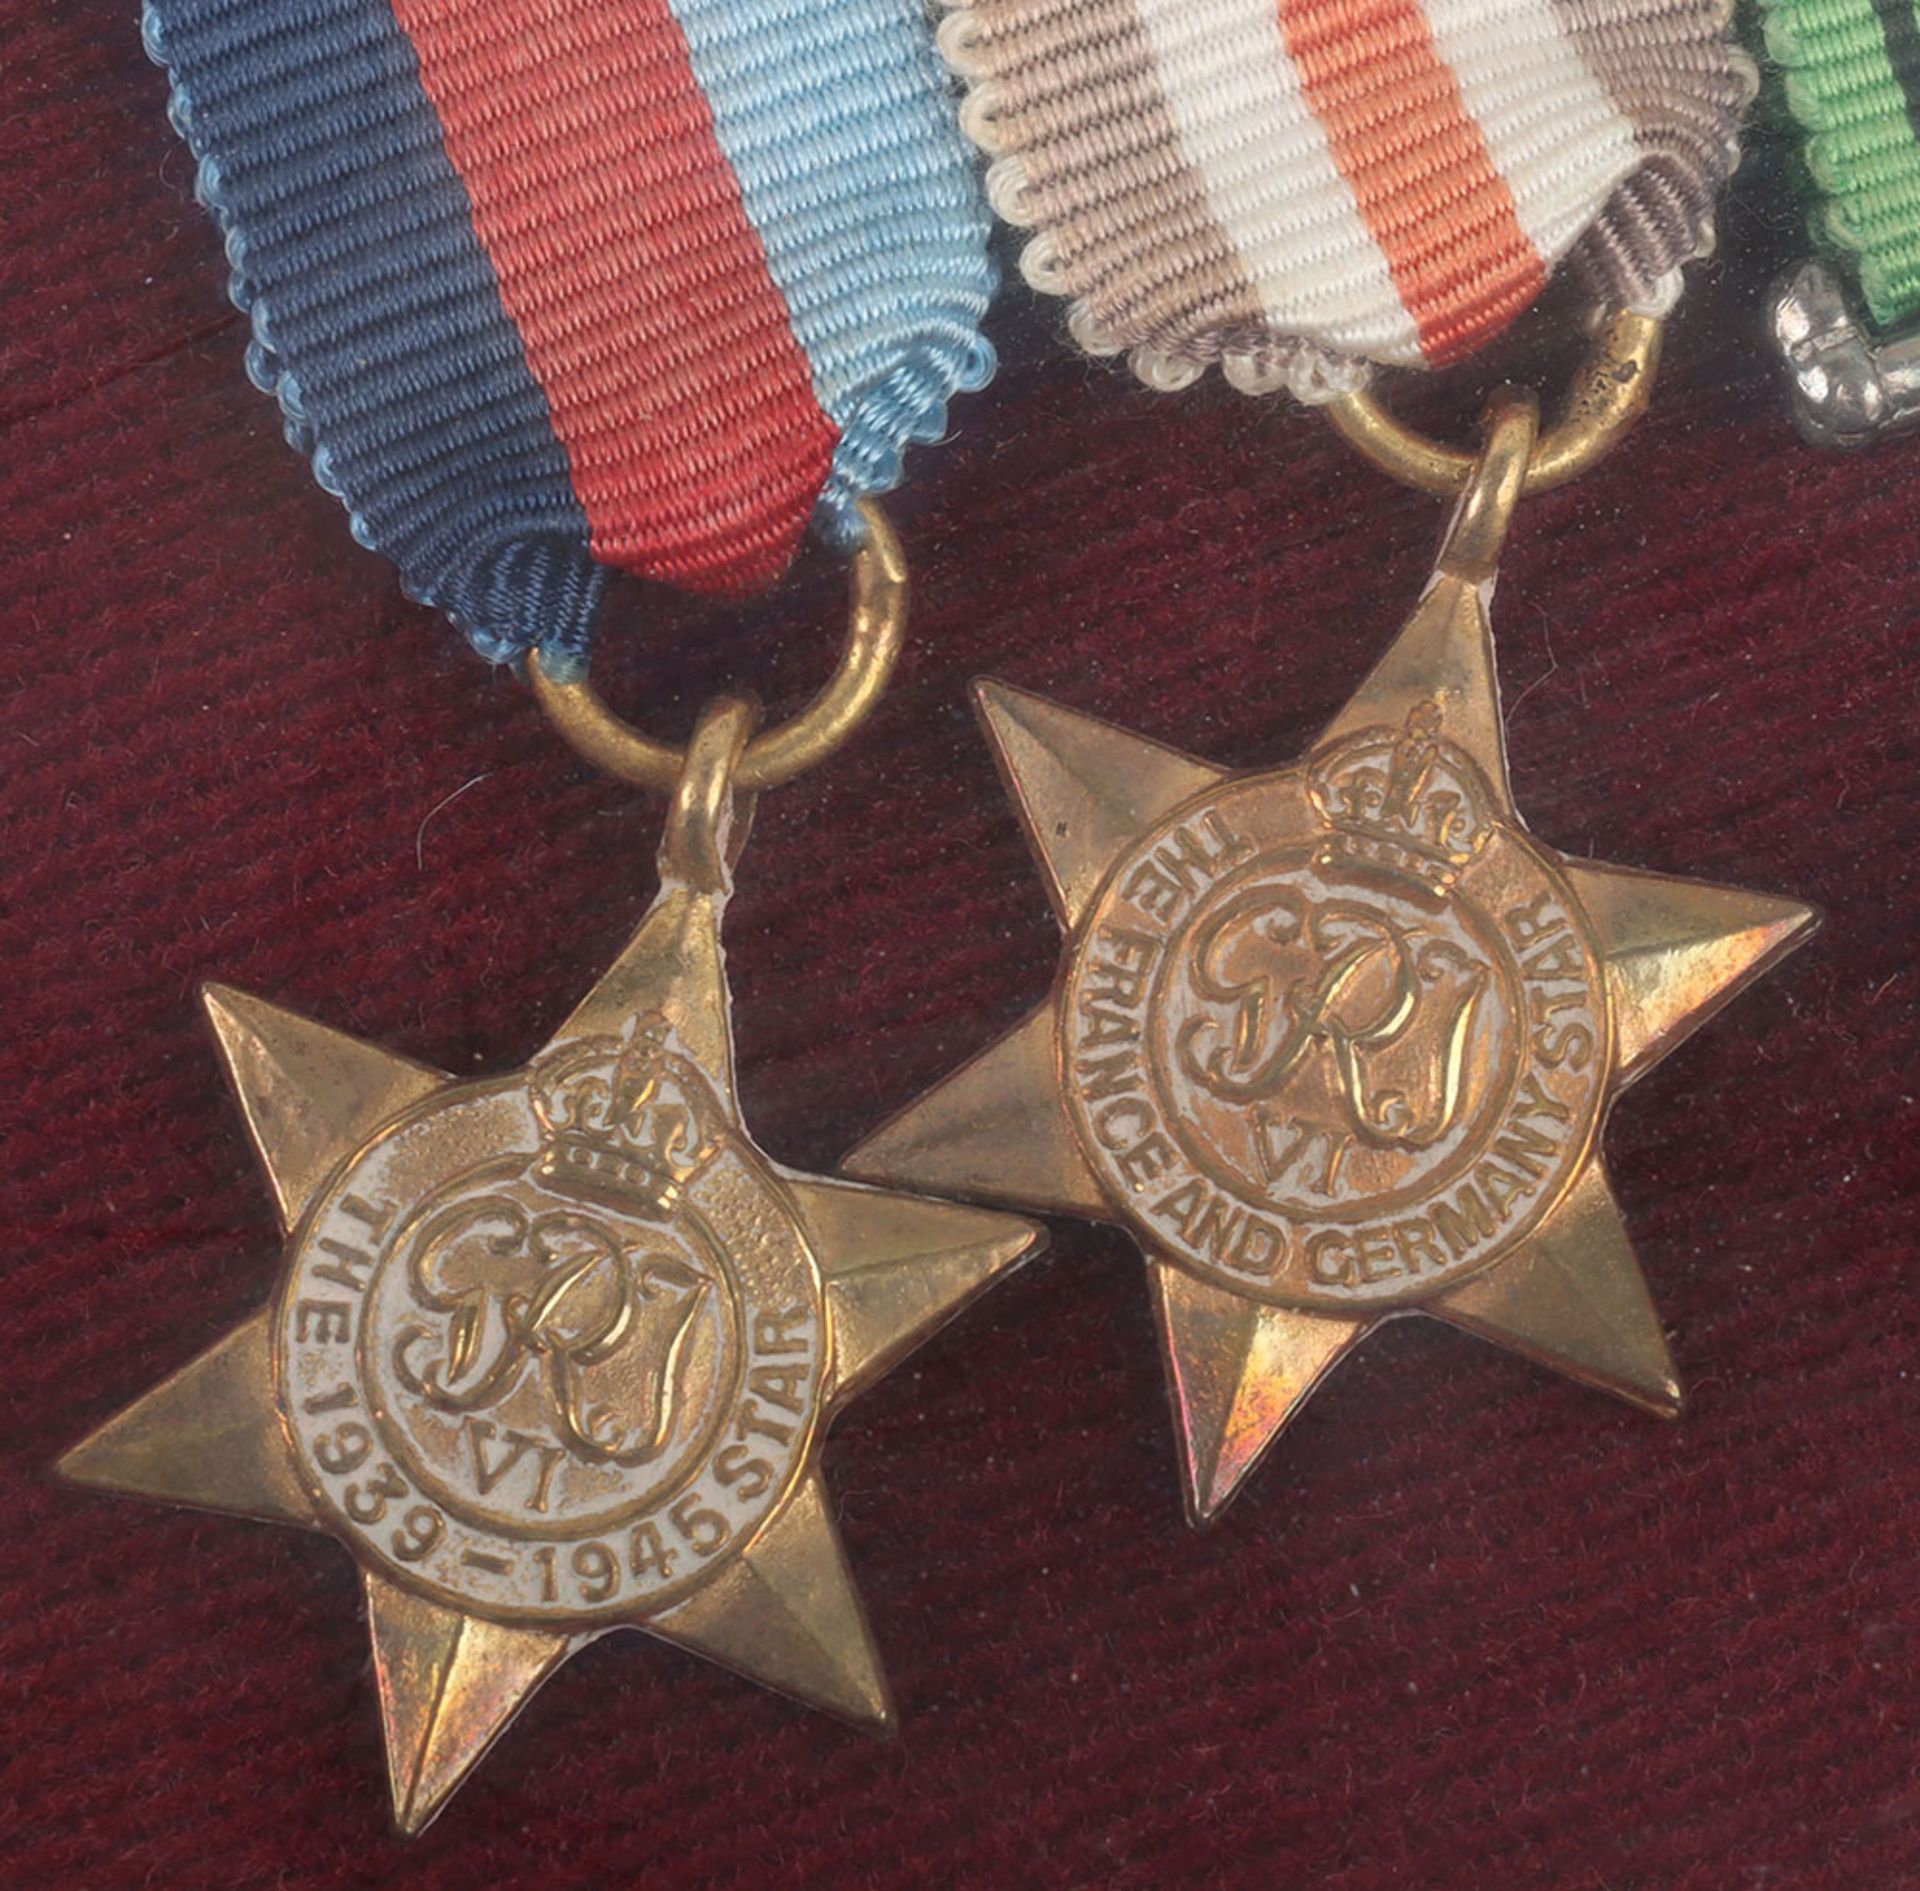 A Second World War Territorial Long Service Medal Group of 5 - Image 7 of 8